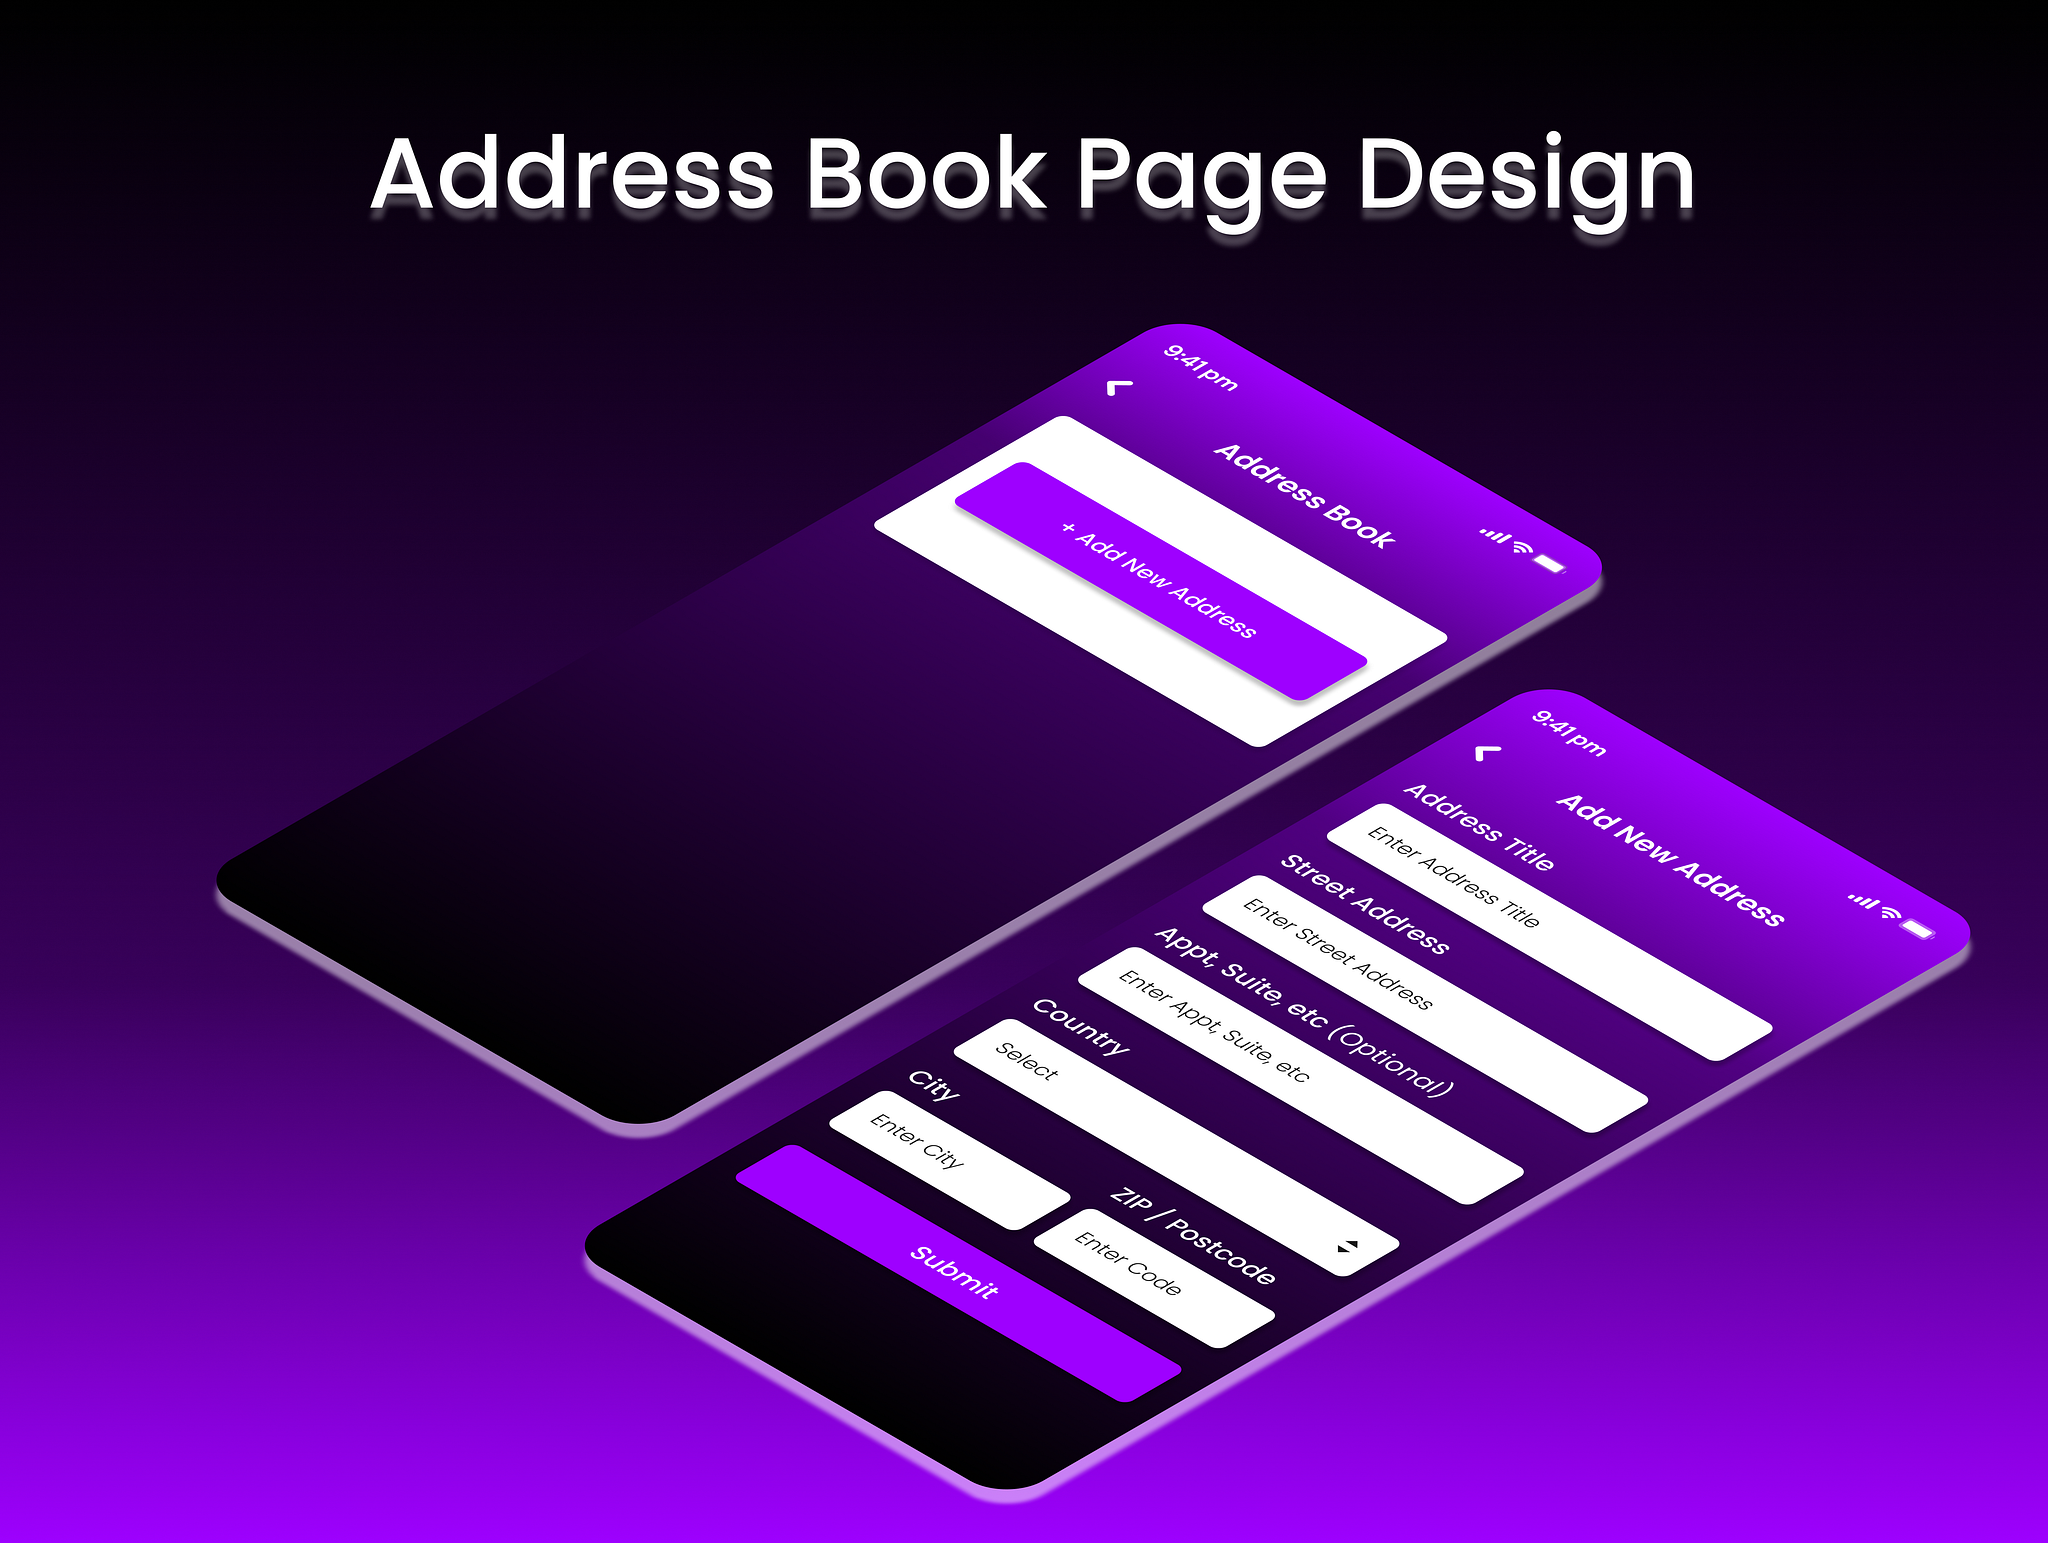 address-book-design-for-mobile-app-by-barin-jahan-bristy-on-dribbble